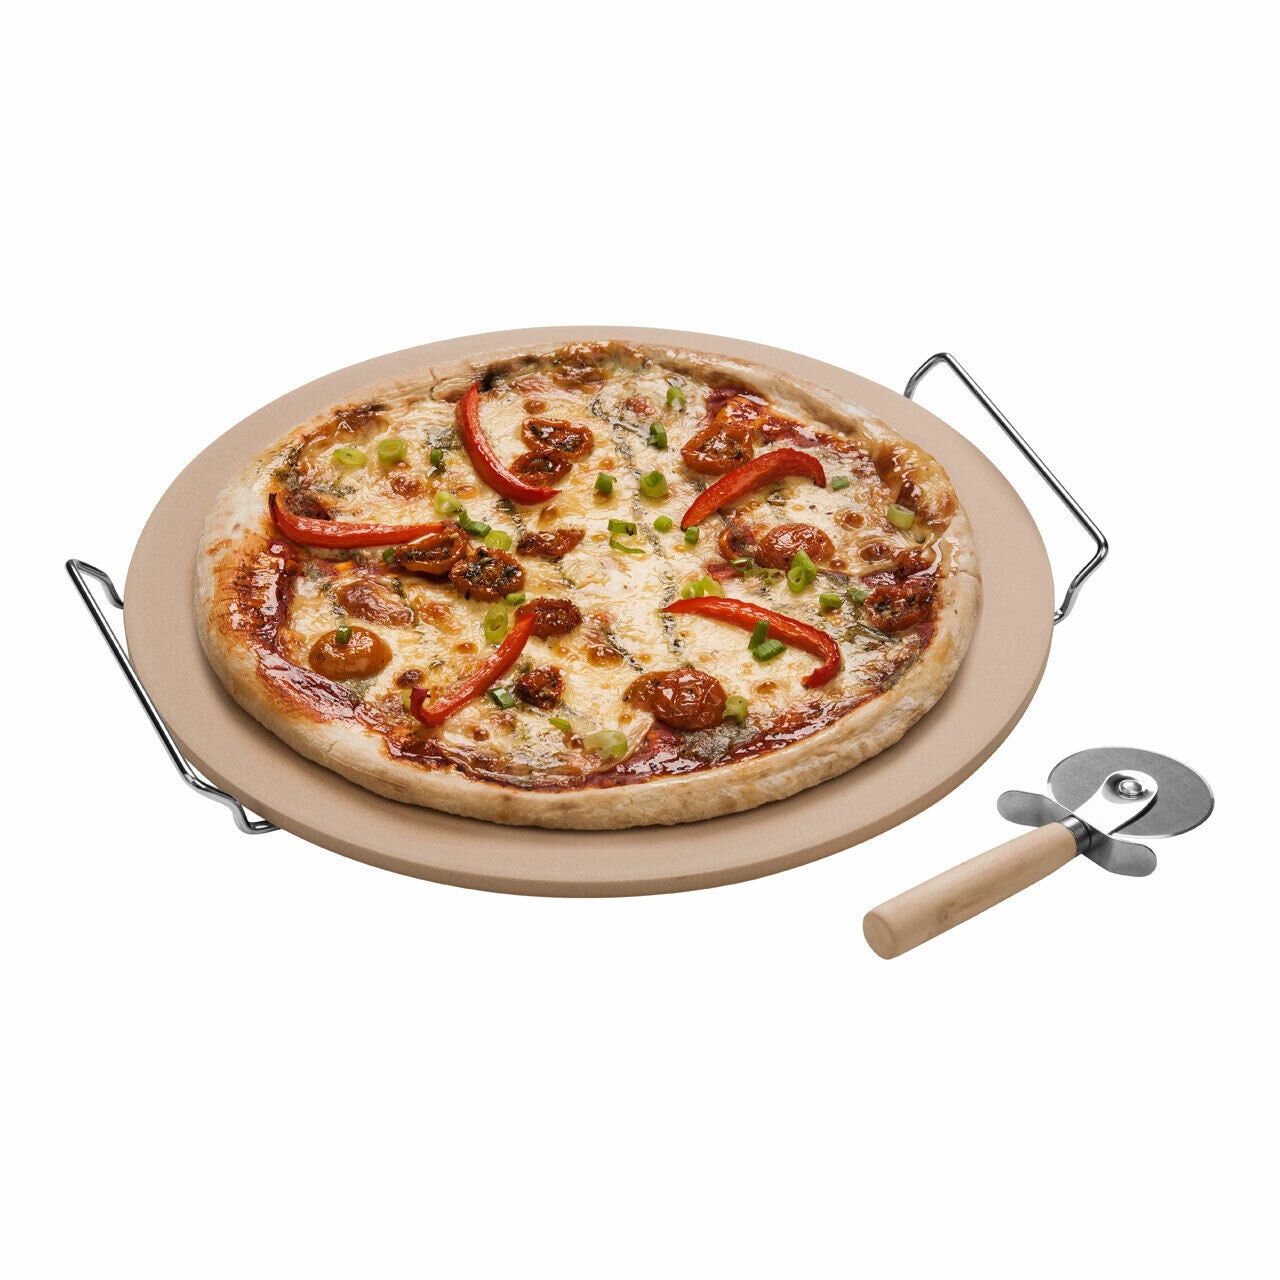 Dough Tools Play Set for Kids Set of 4 Pastry Clay Pizza Doh Toys